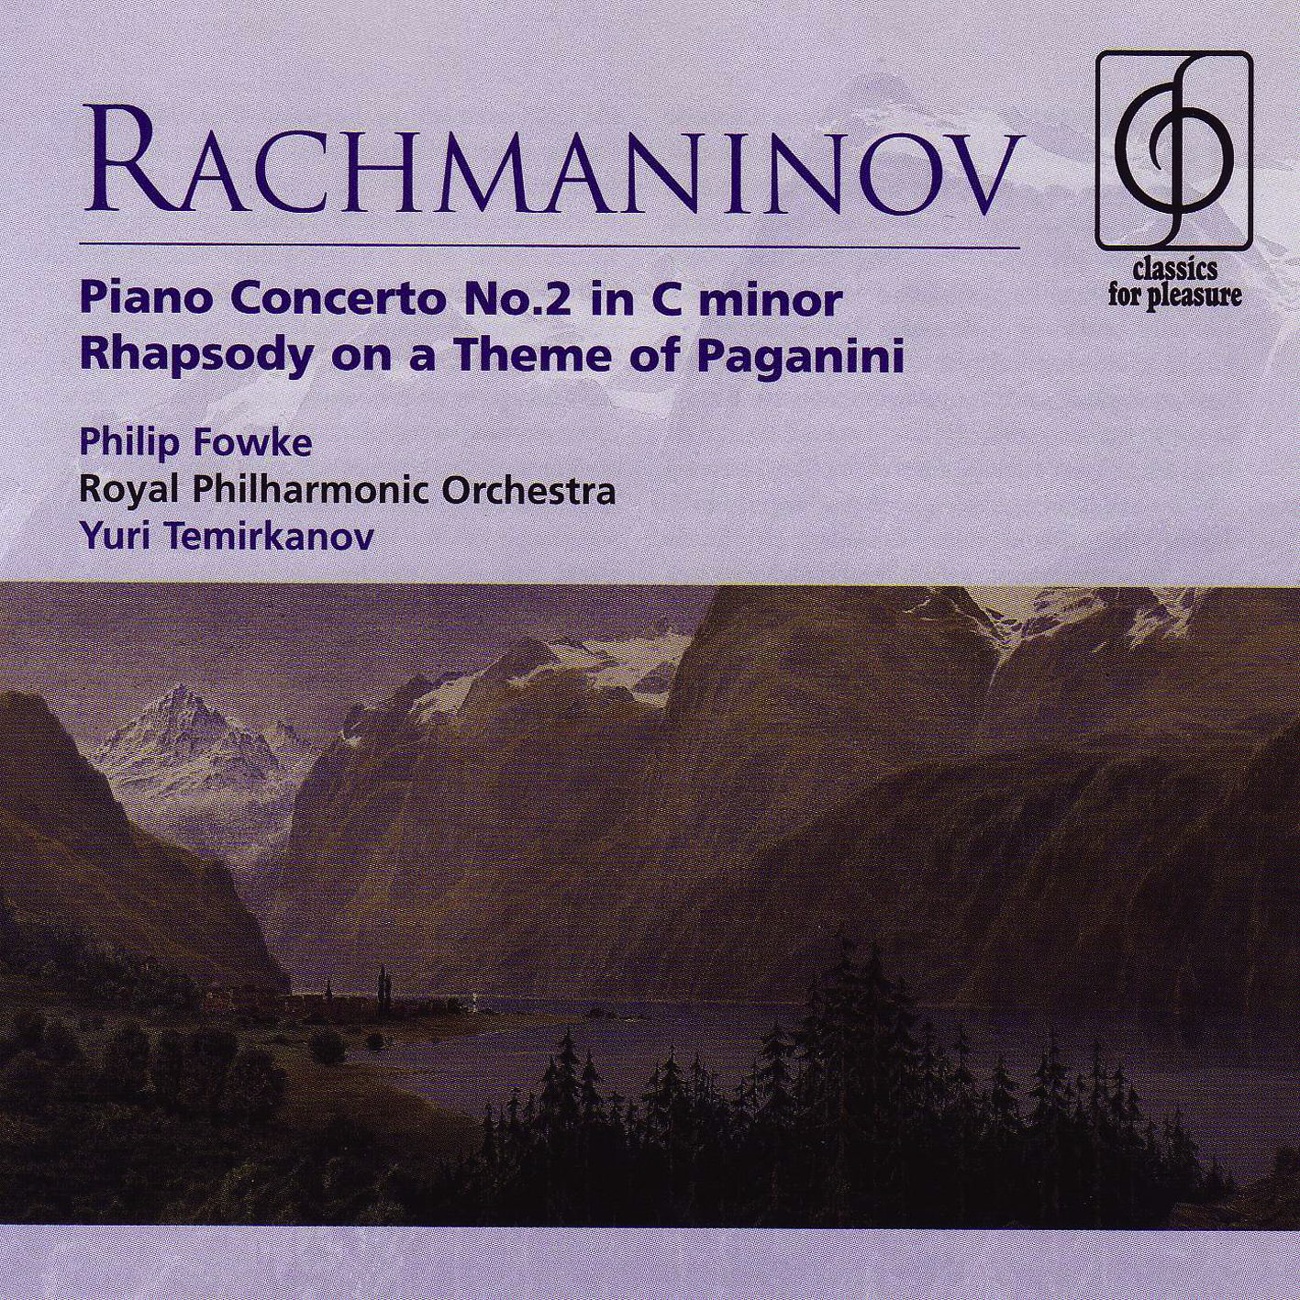 Rhapsody on a Theme of Paganini Op. 43: Variation IV